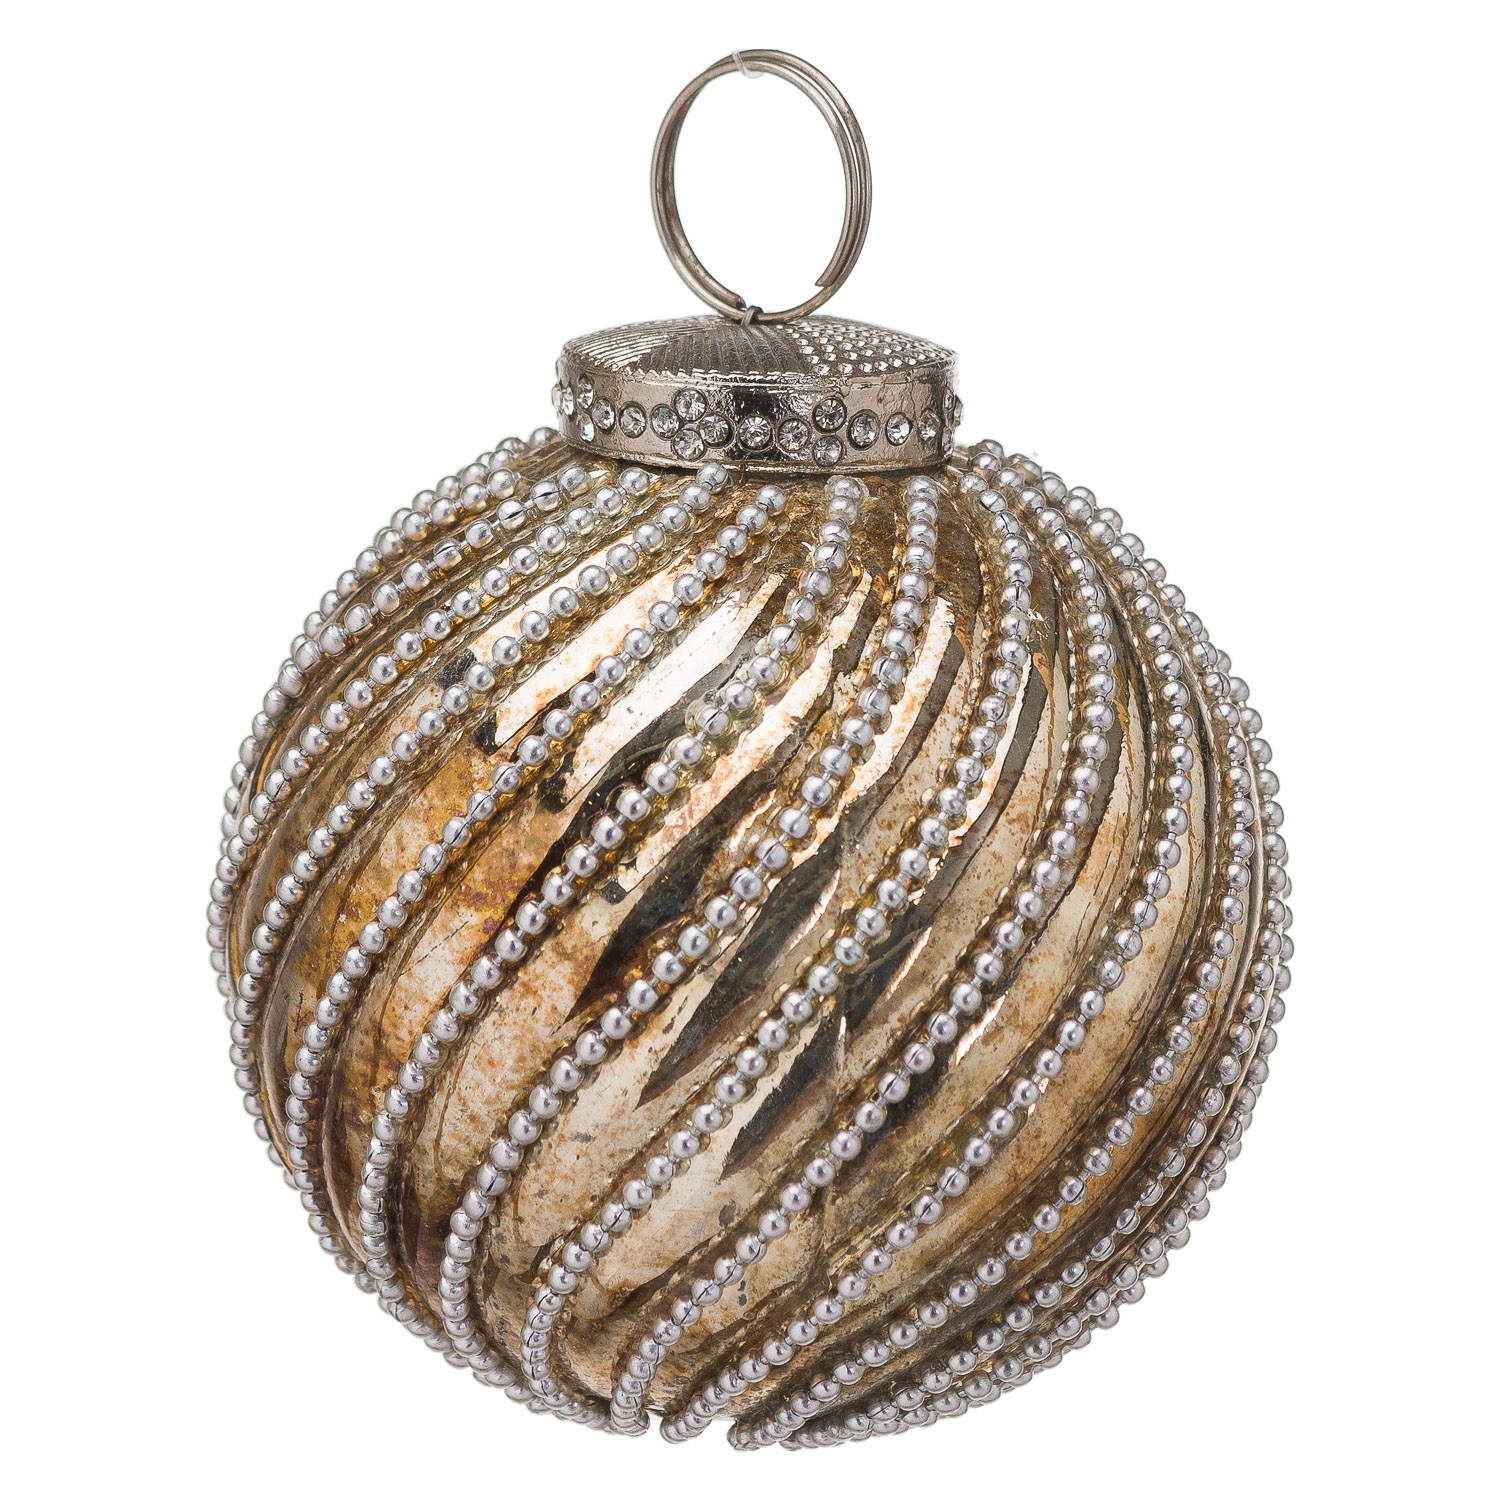 The Noel Collection Burnished Jewel Swirl Large Bauble - Image 1